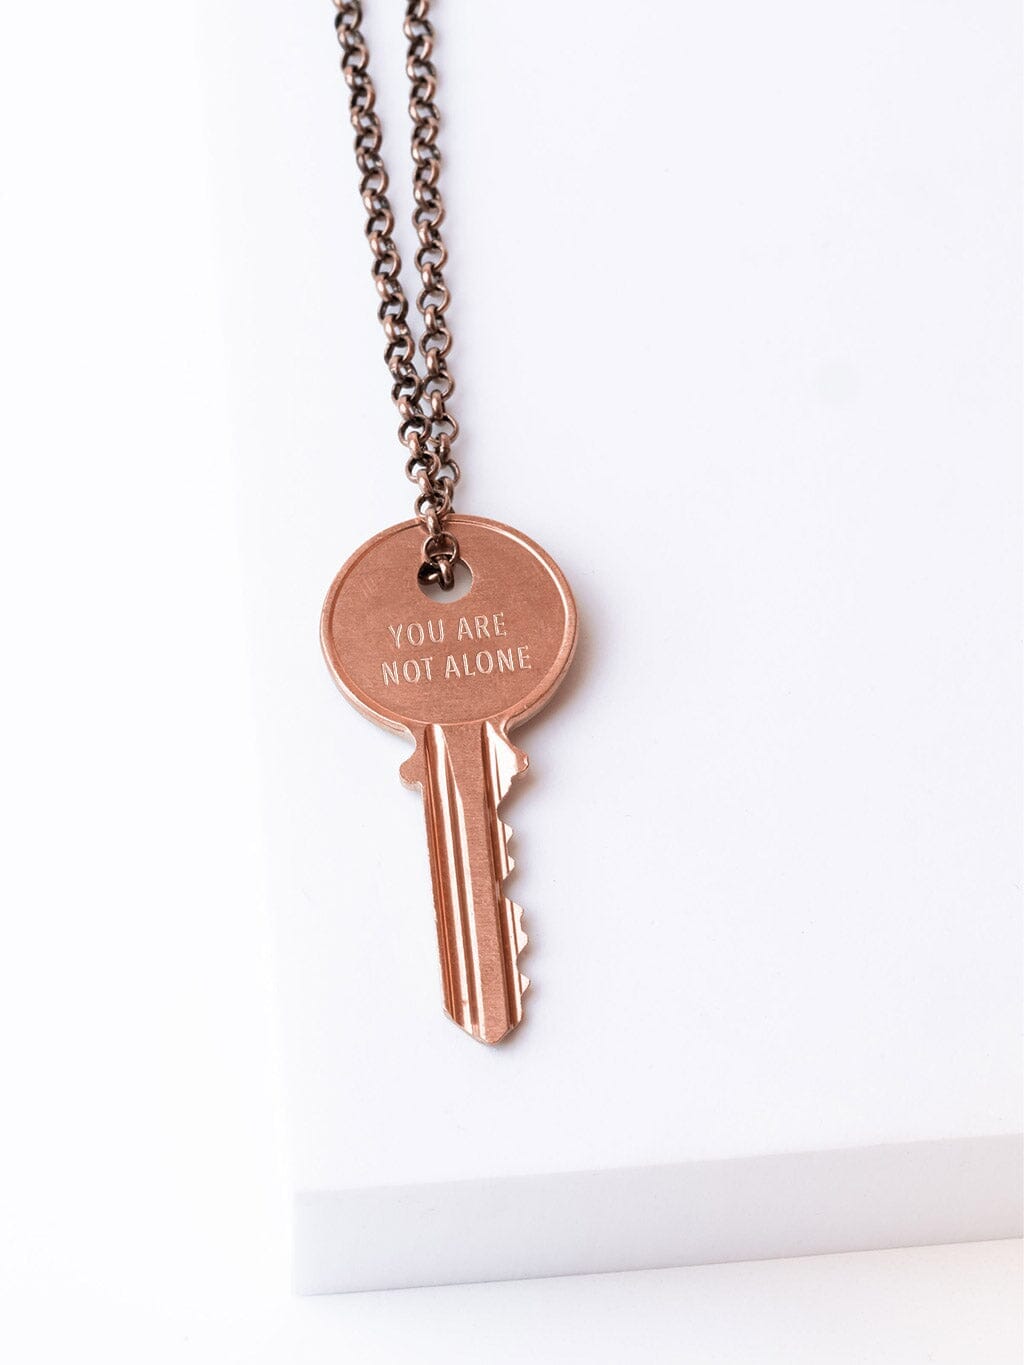 N - YOU ARE NOT ALONE Classic Key Necklace Necklaces The Giving Keys 